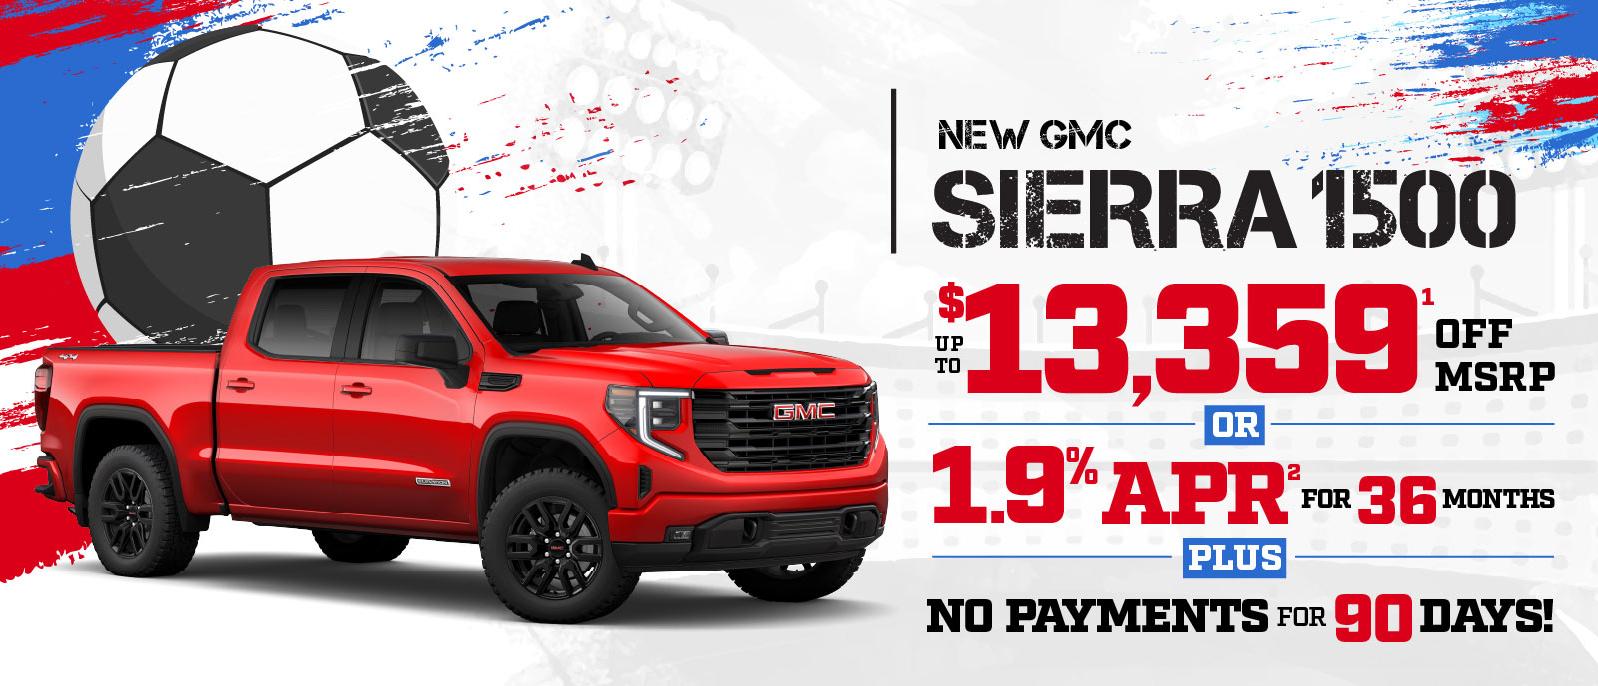 New GMC Sierra 1500 - save up to $13,359 off MSRP or 1.9% APR for 36 months plus no payments for 90 days